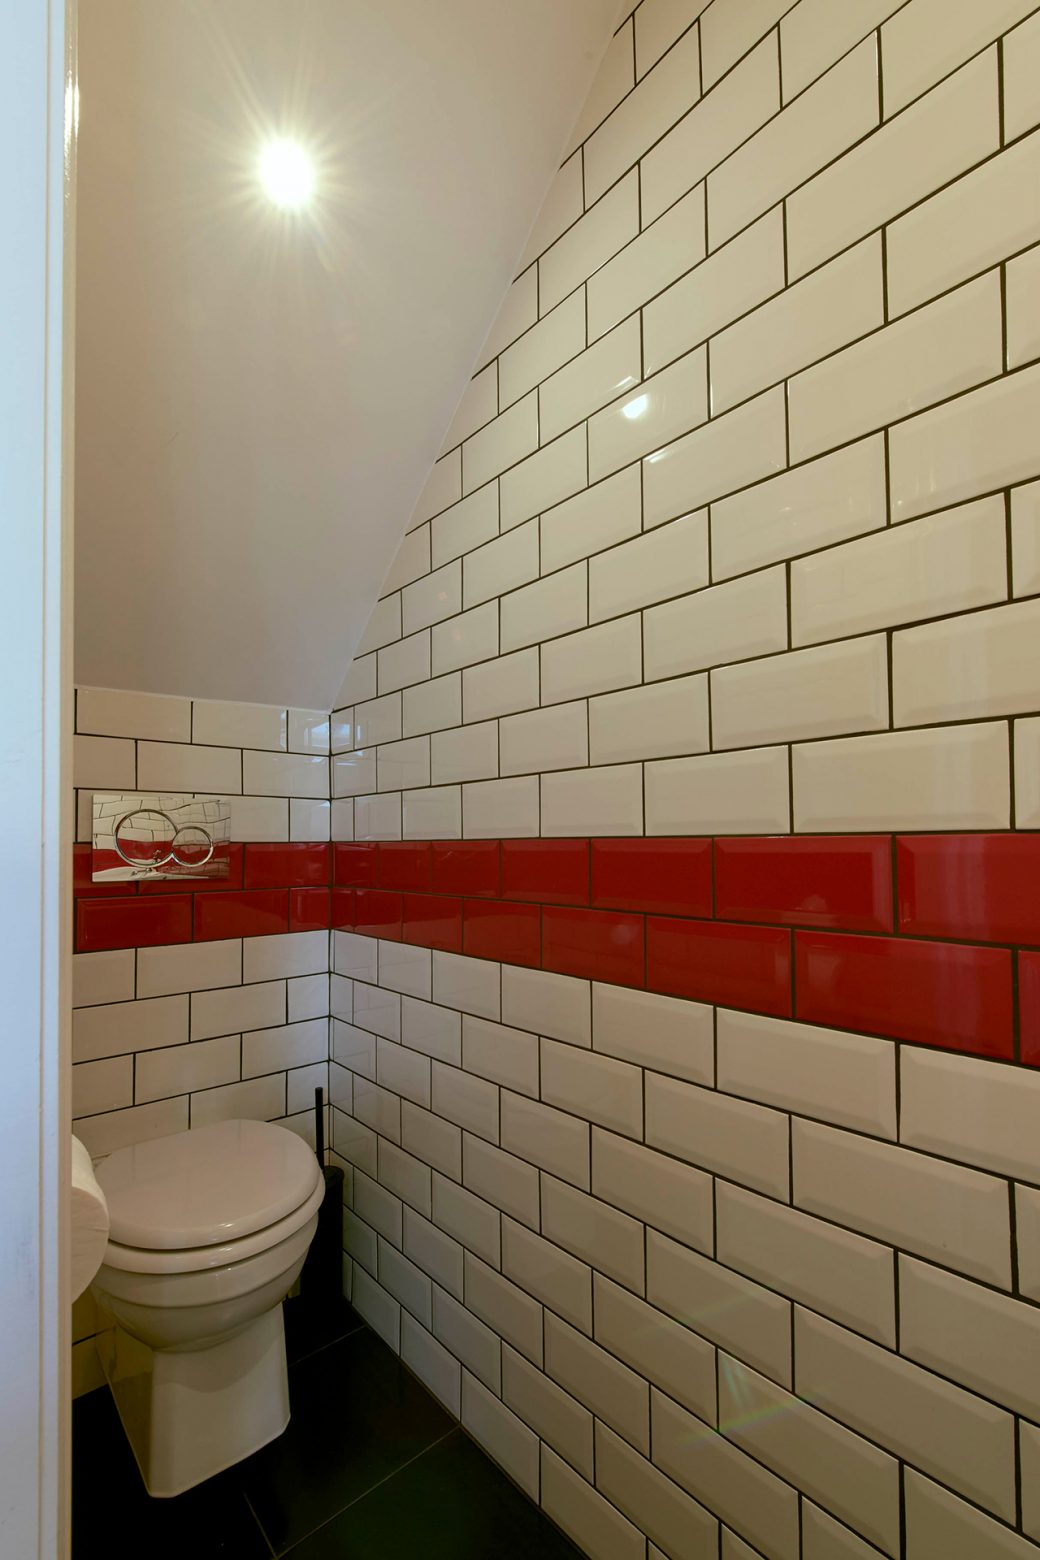 Bathroom with white subway tiles with a contrasting red stripe of tiles